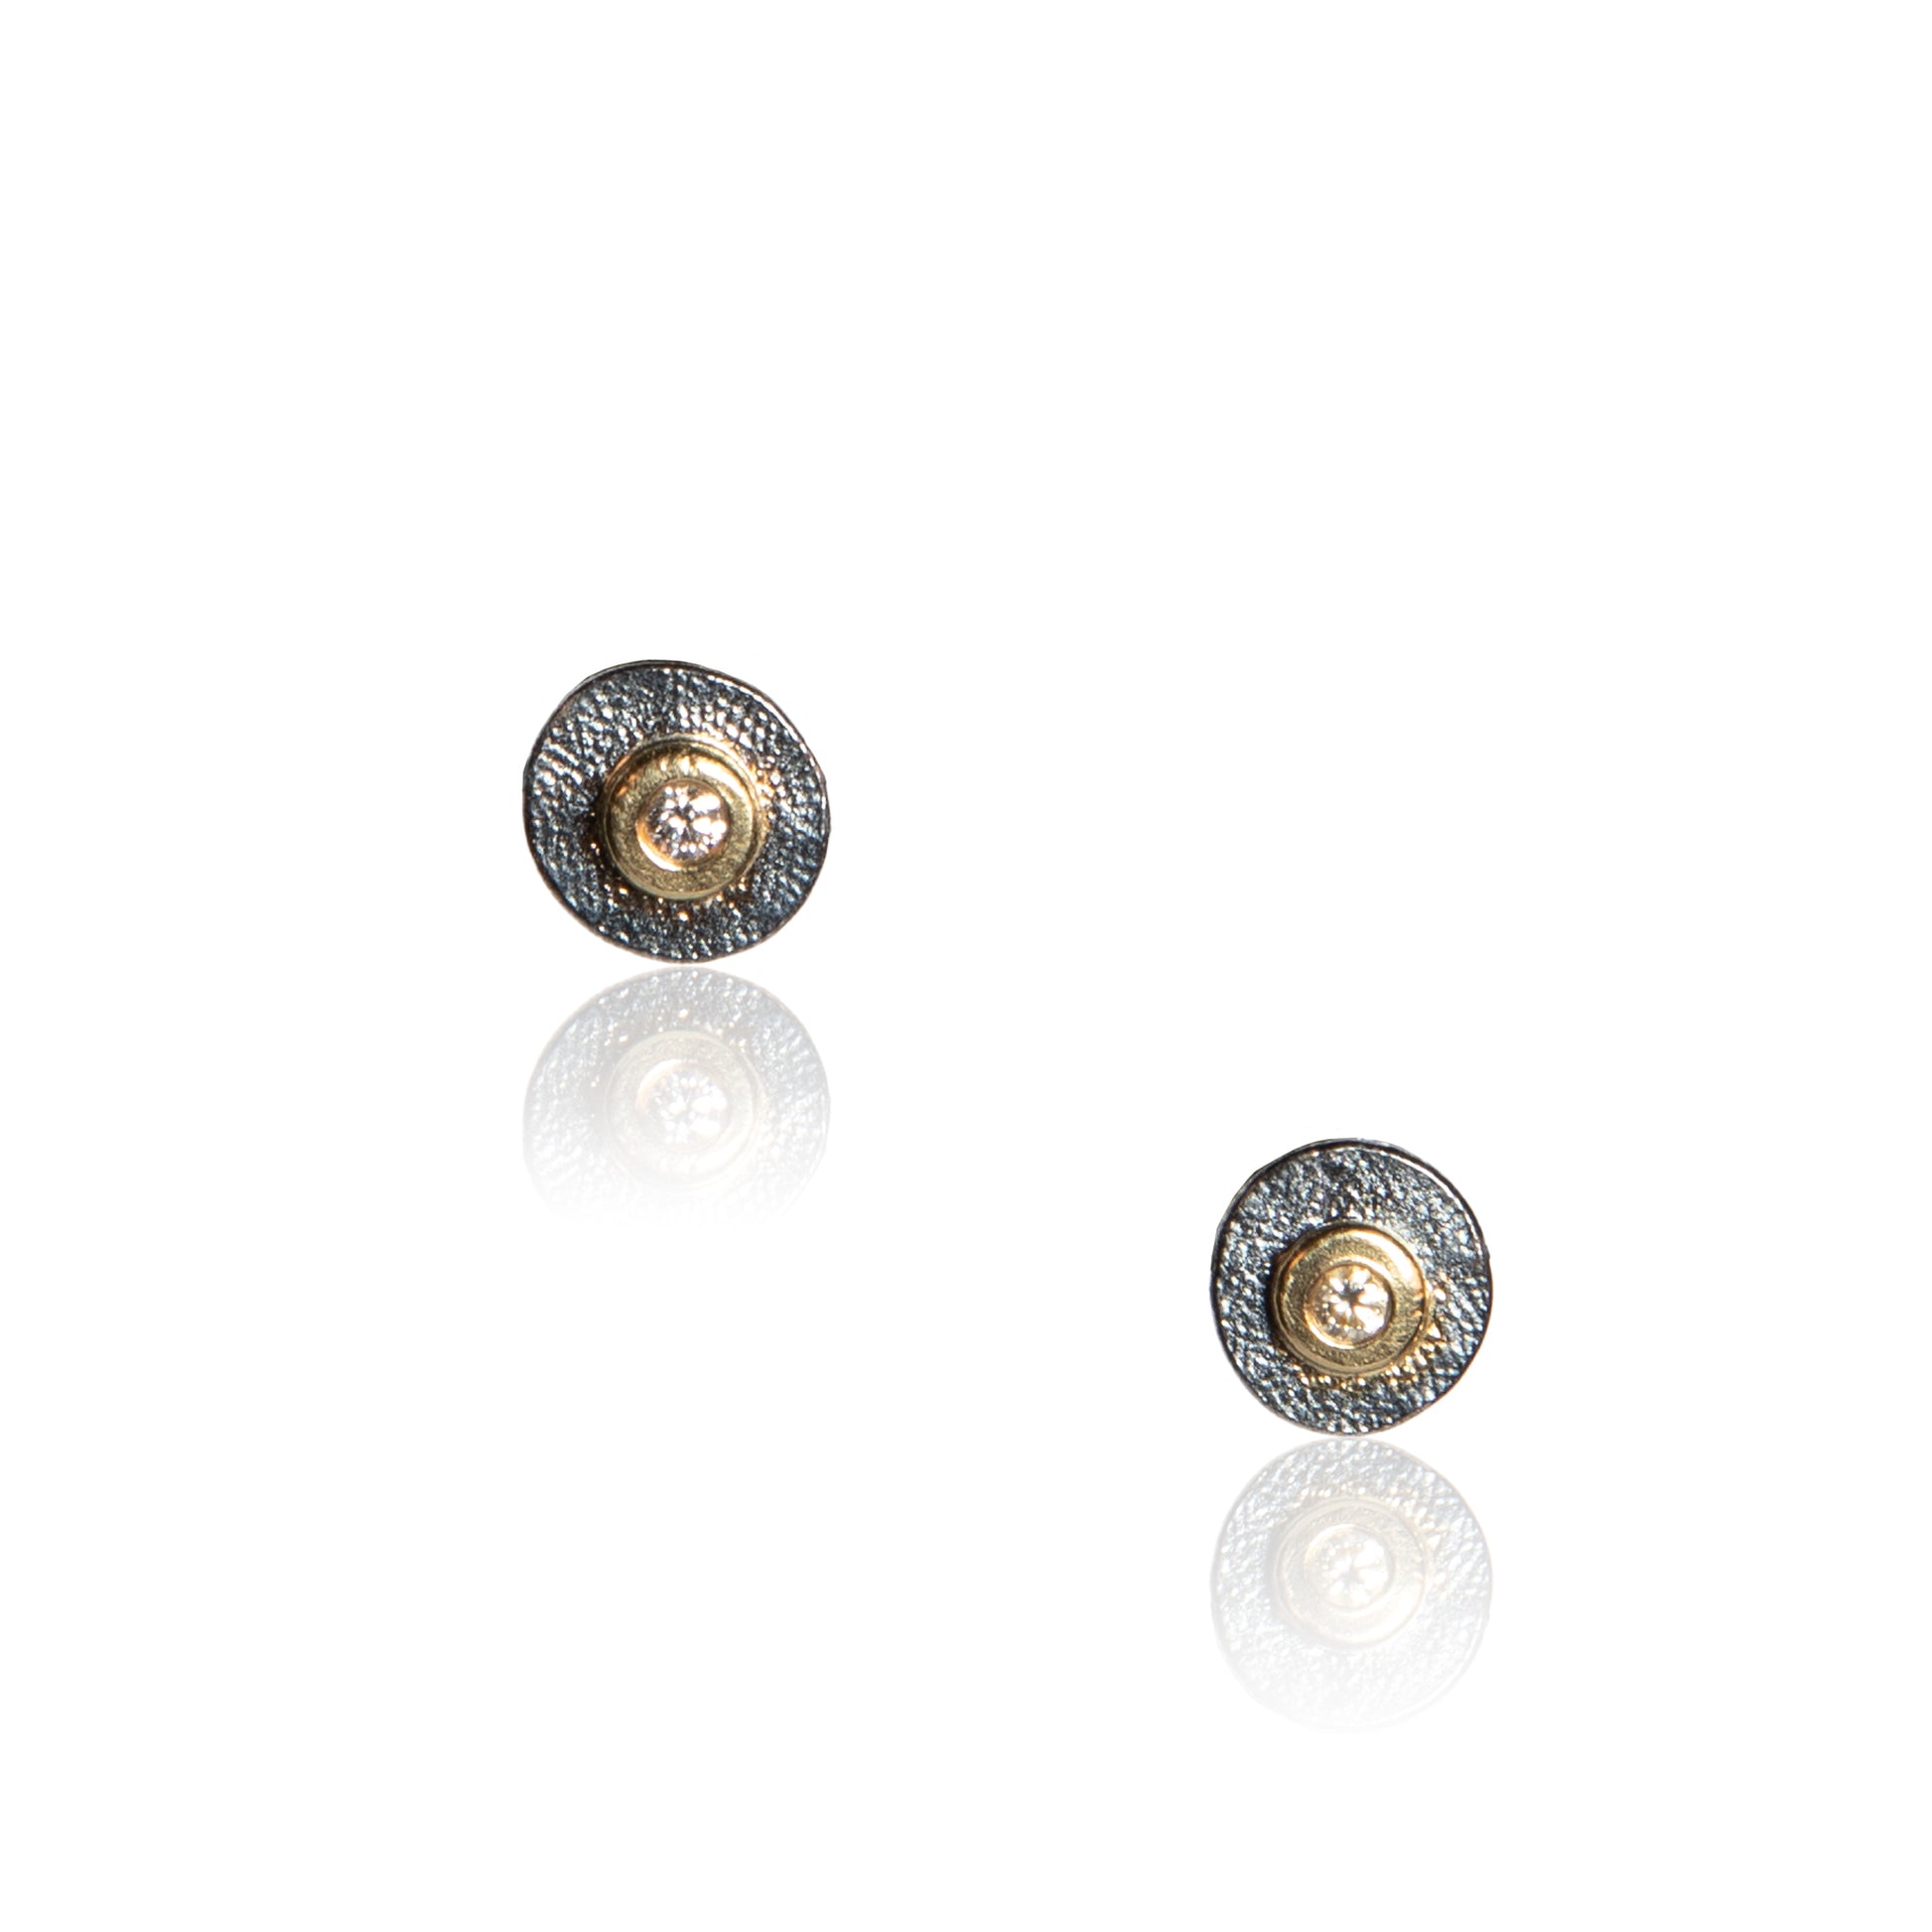 Oxidized silver post earrings with diamonds set in yellow gold by Joanna Gollberg